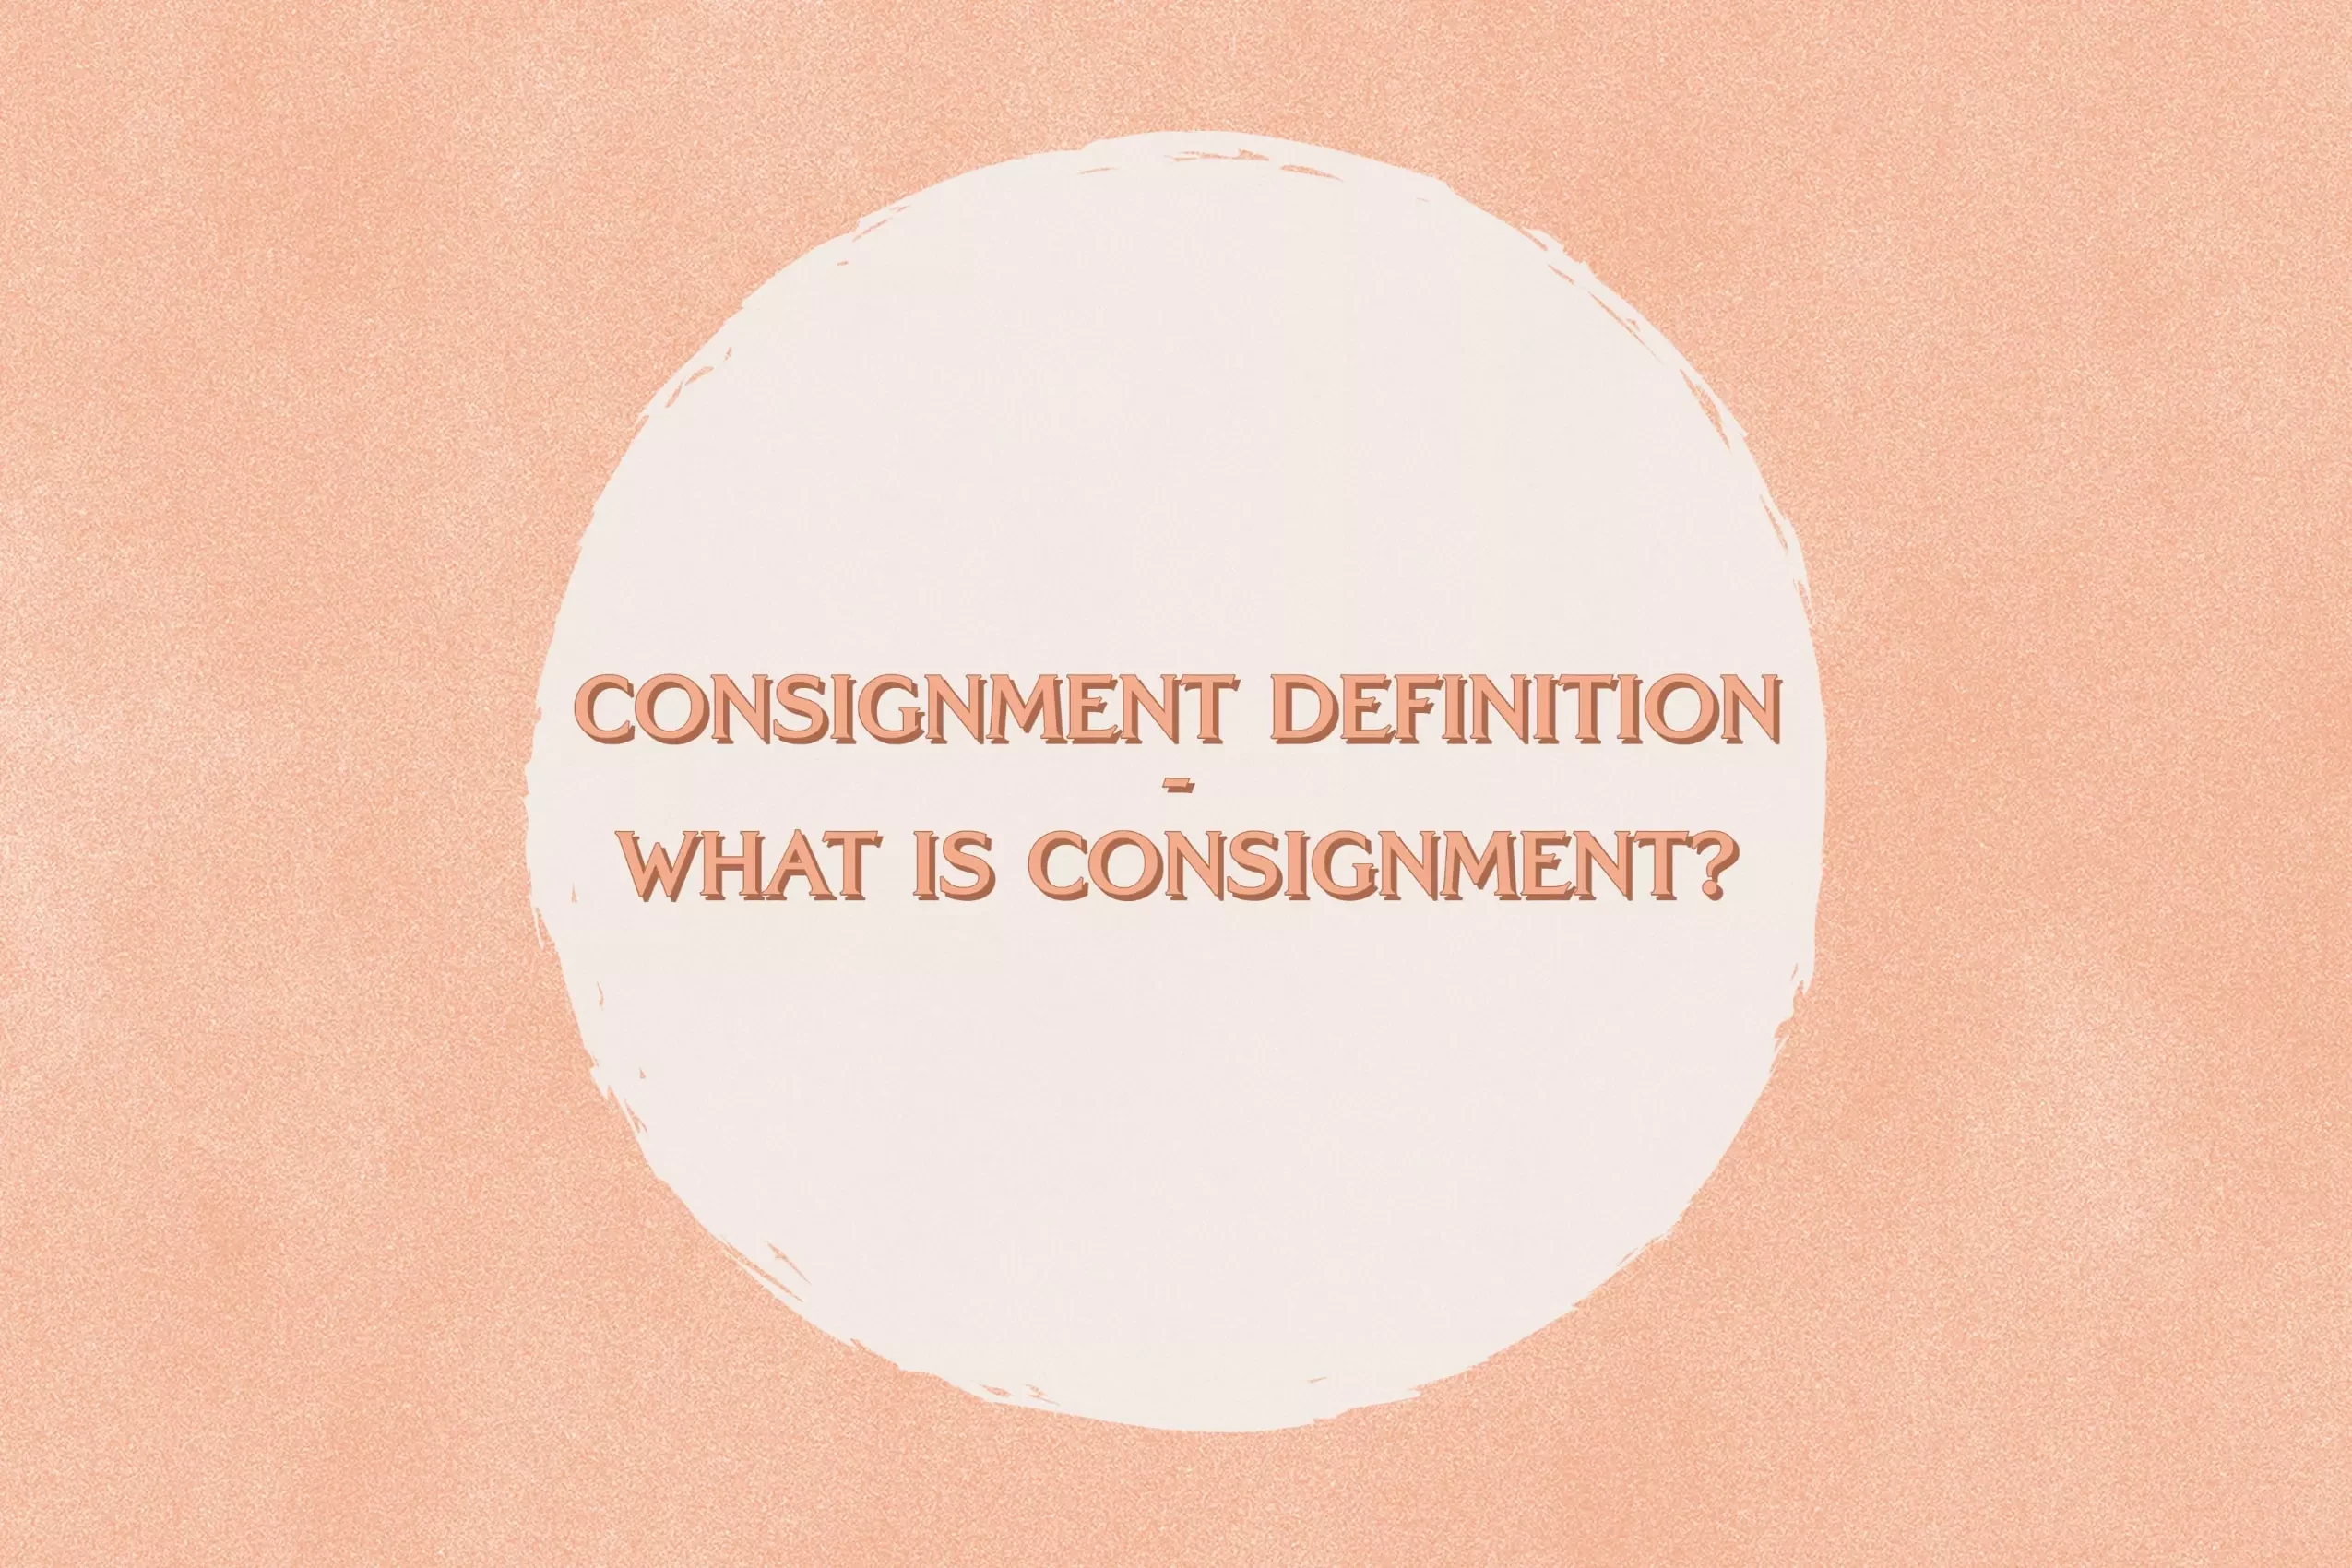 Consignment Definition – What is Consignment?